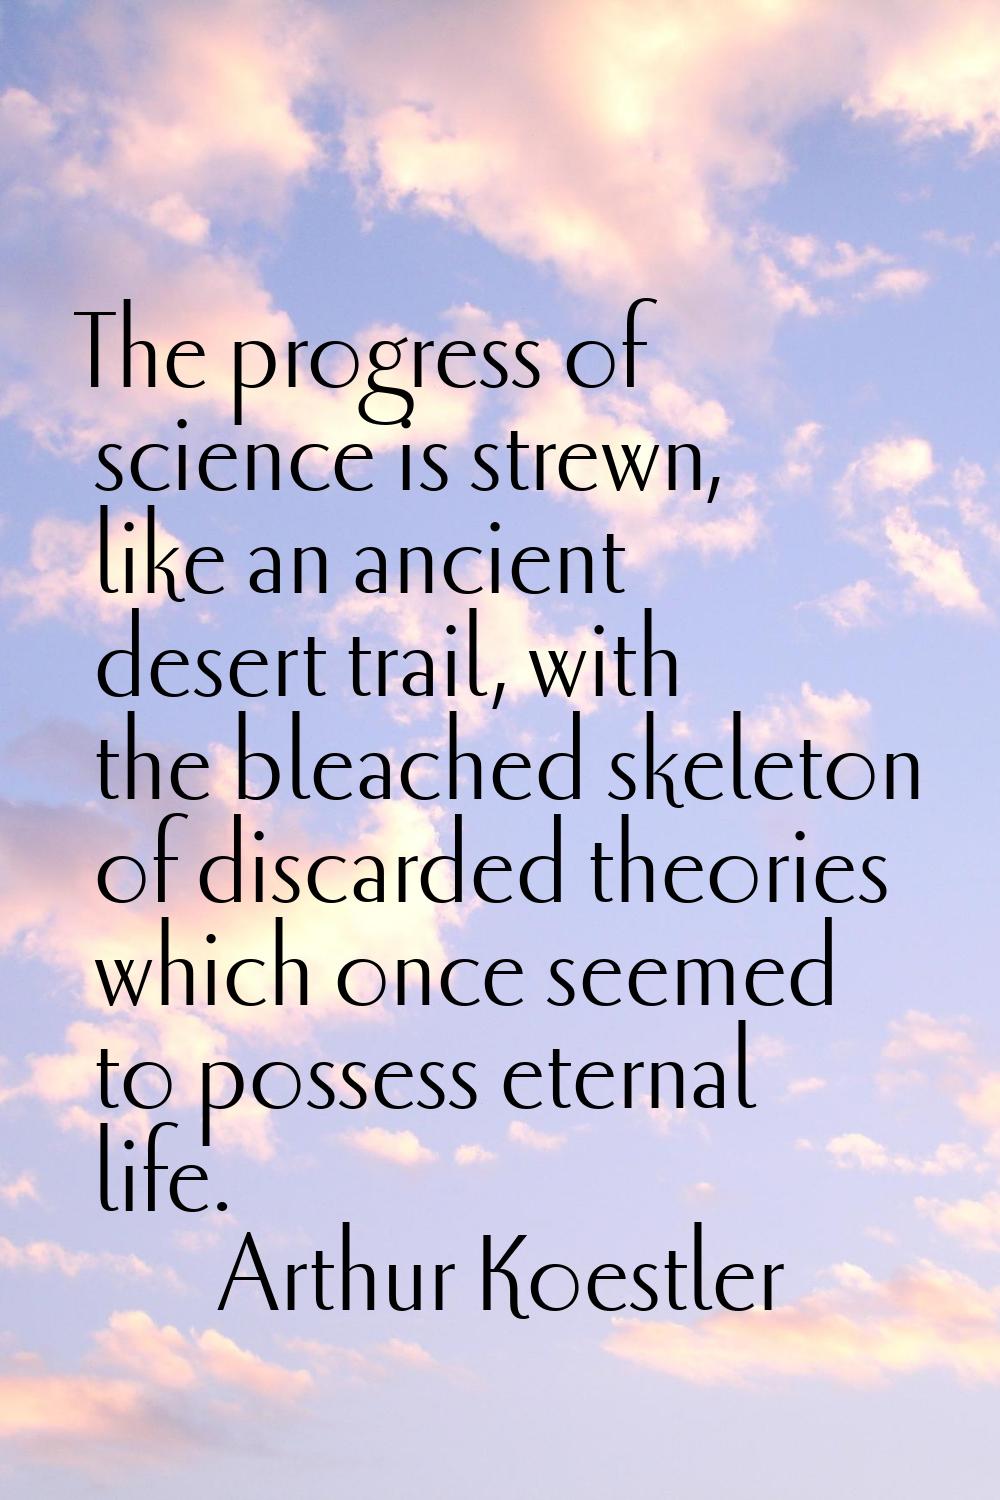 The progress of science is strewn, like an ancient desert trail, with the bleached skeleton of disc